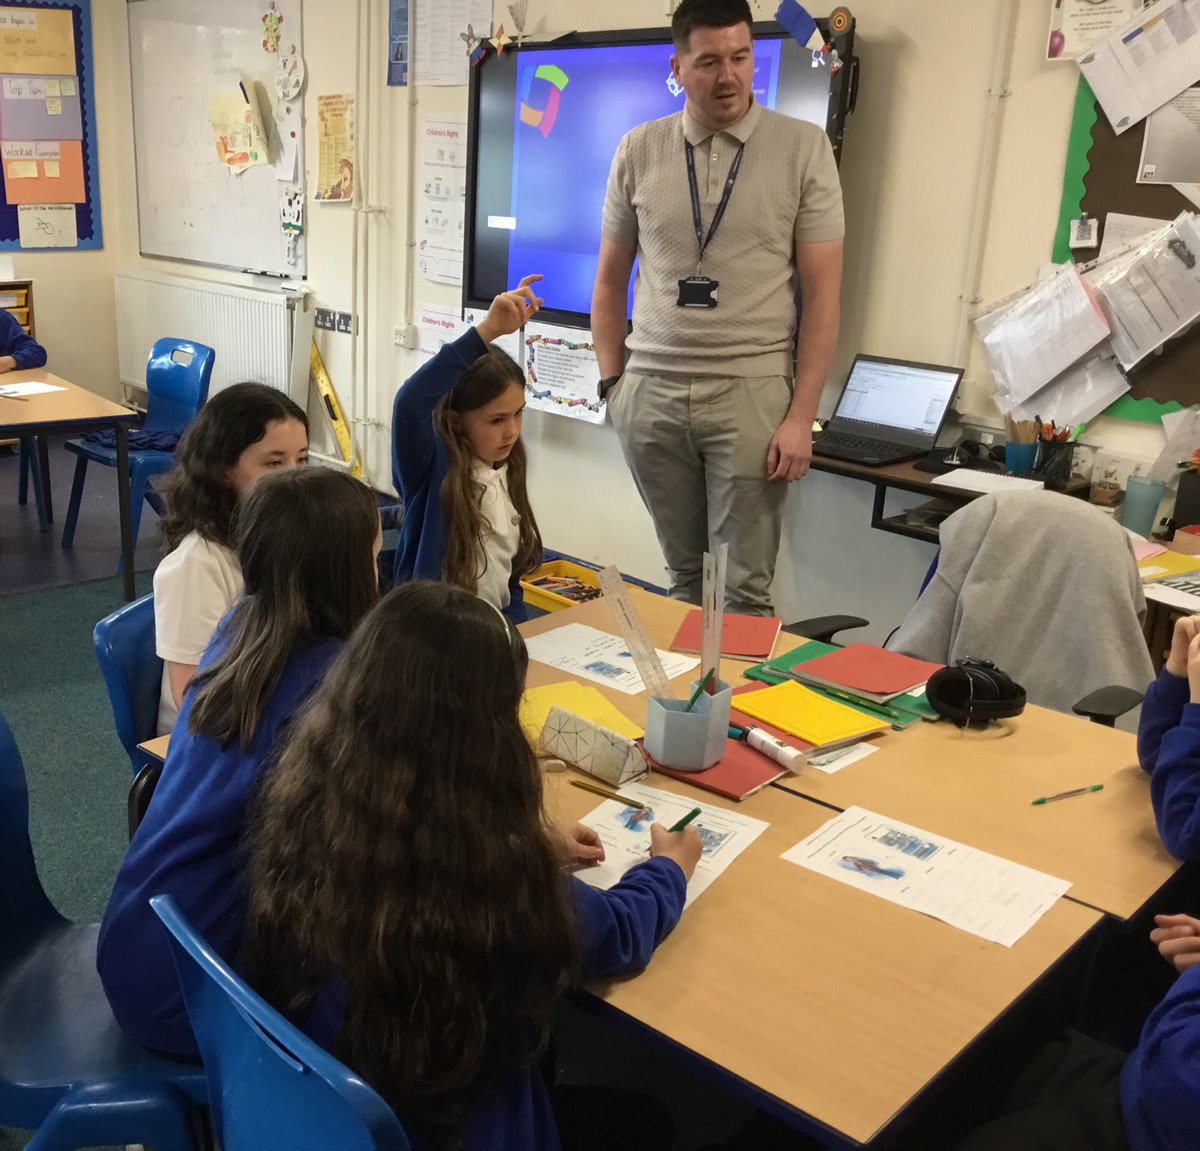 Year 5 were lucky enough to have two scientists visit today! Thank you to @Georgin43000528 for your talk about climate change and to Geraint from @WelshFellows for teaching us about the role of a community pharmacist.